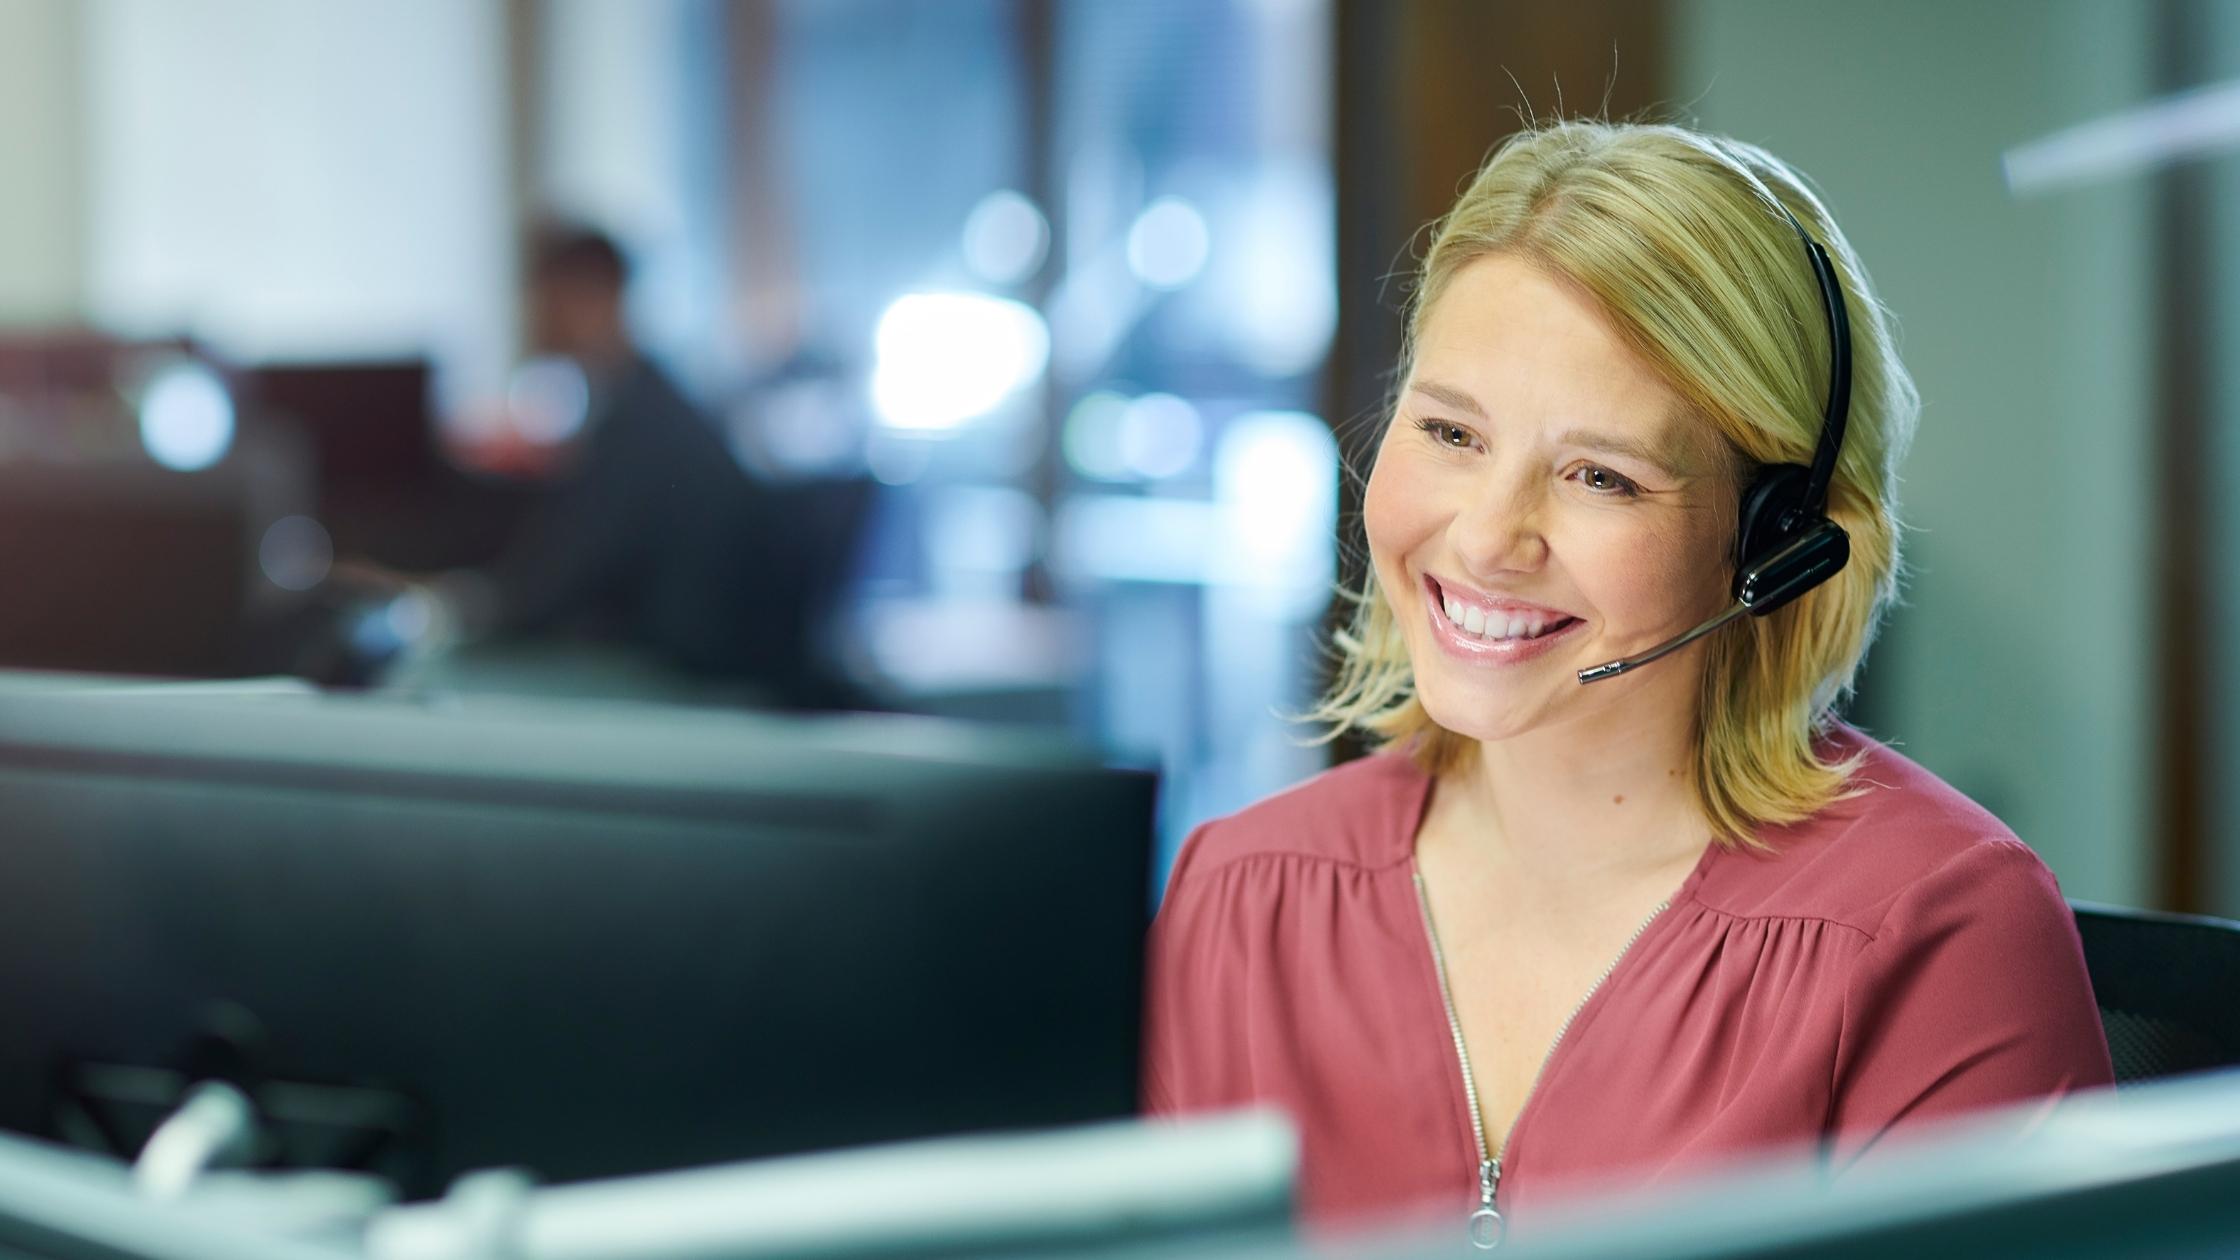 Industry Standards for Contact Center Metrics - Connectel